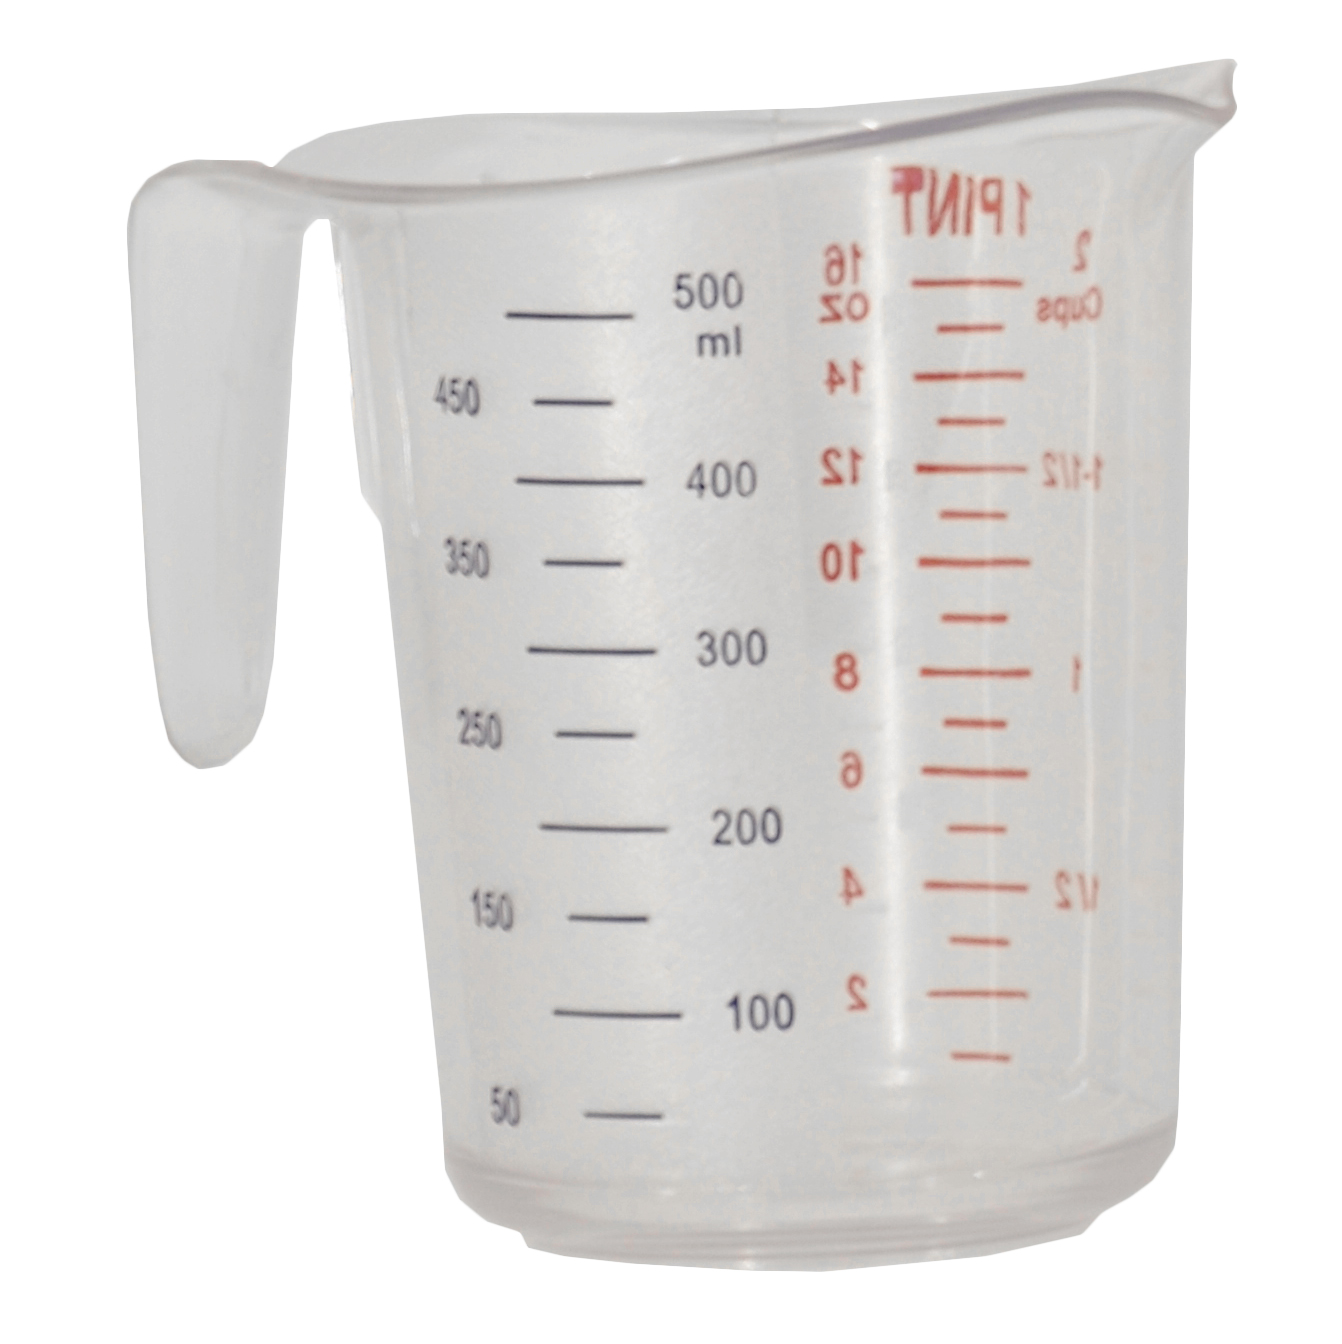 0.53 QT / 500 ml Clear Polycarbonate Measuring Cup Omcan